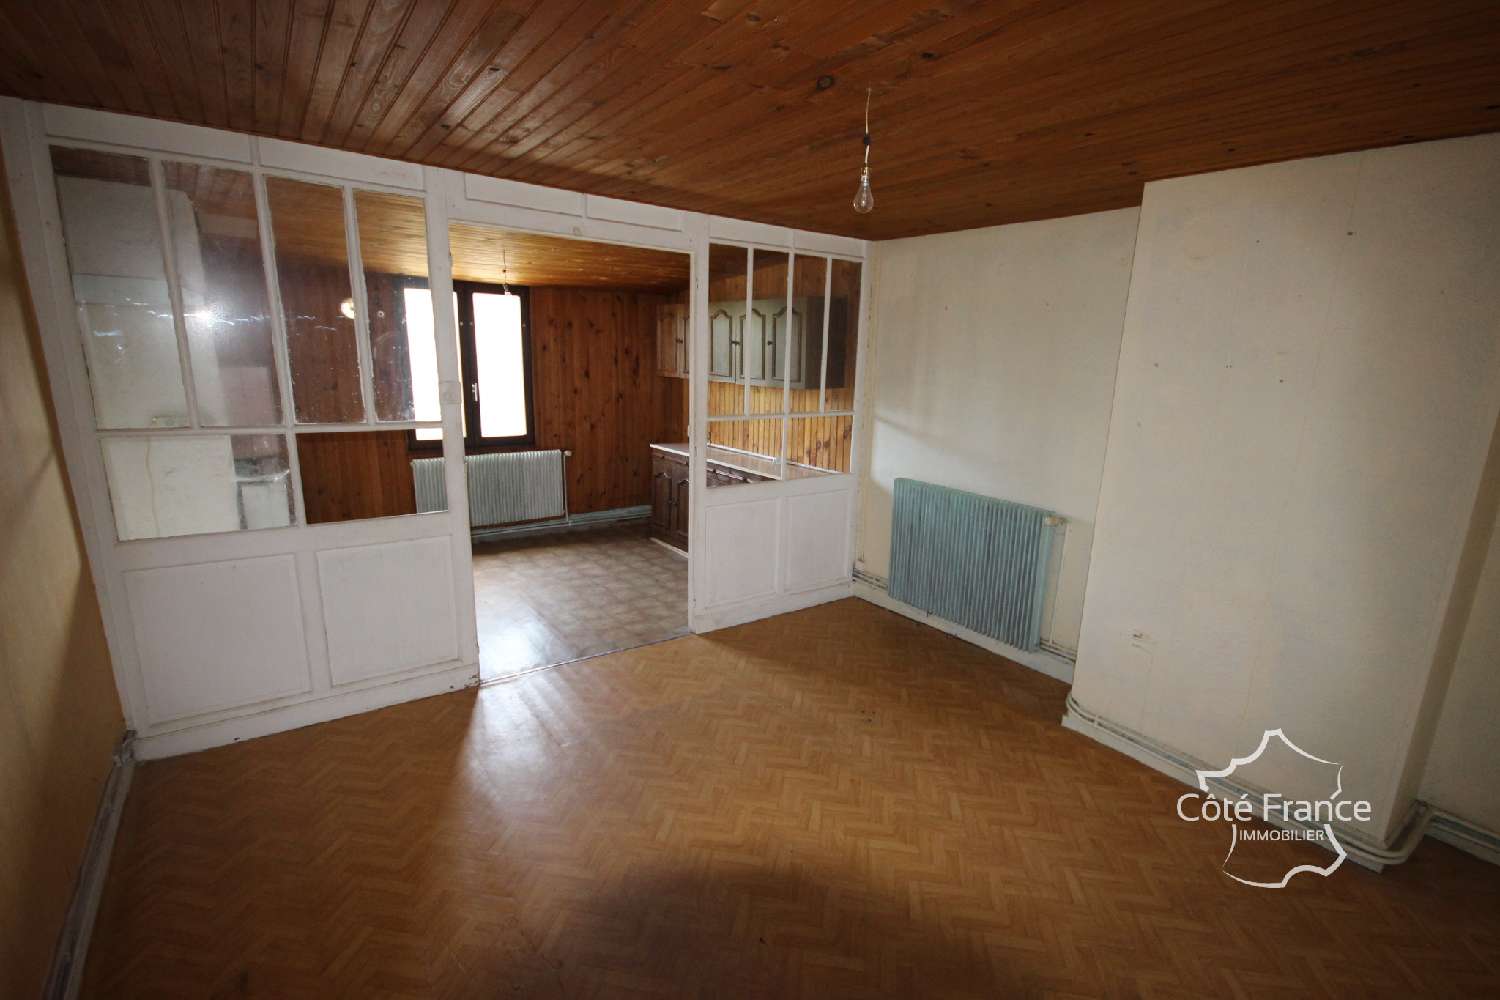  for sale house Givet Ardennes 2